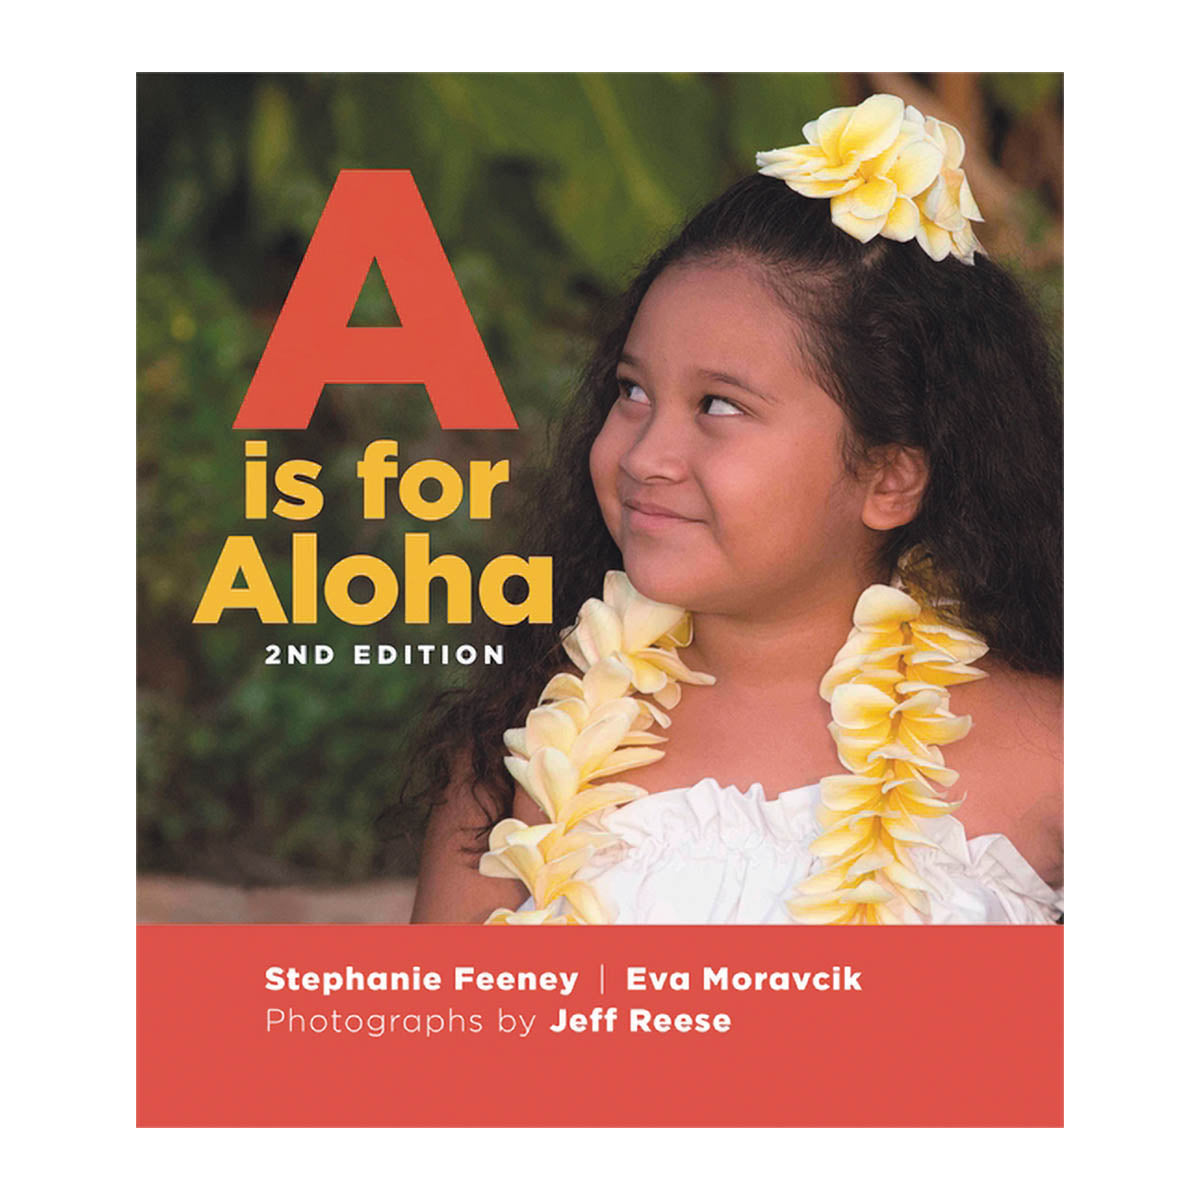 A is for Aloha, 2nd Edition